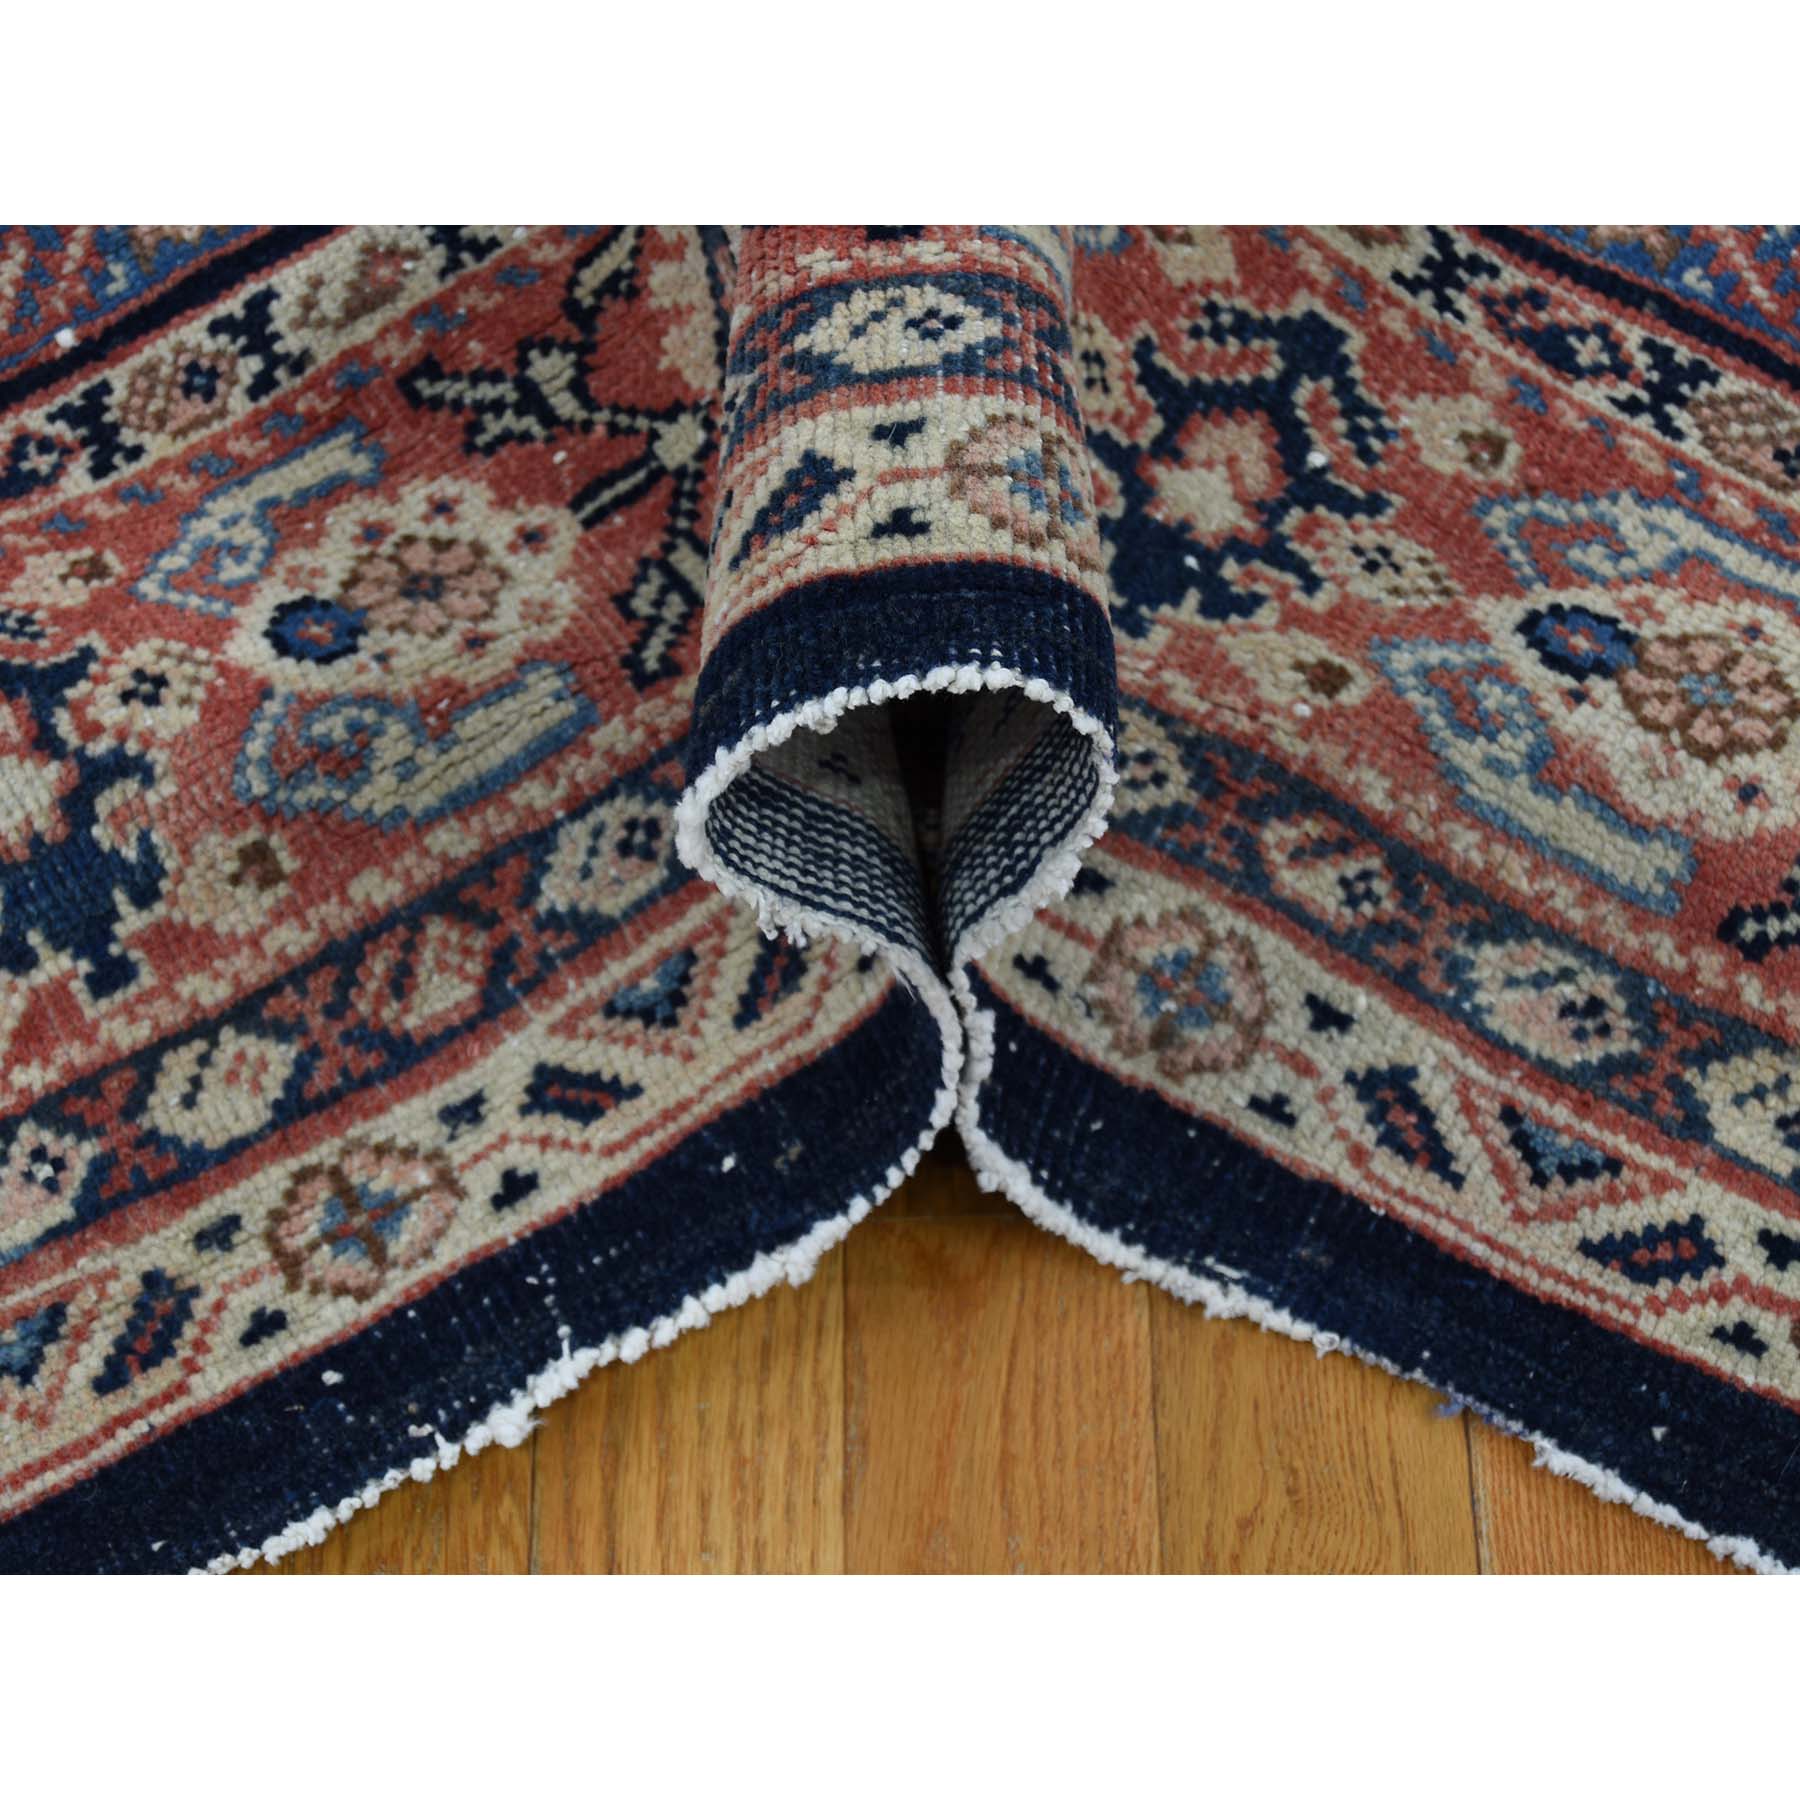 11-x14-3  Antique Persian Mahal Even Wear Navy Blue Hand-Knotted Oriental Rug 